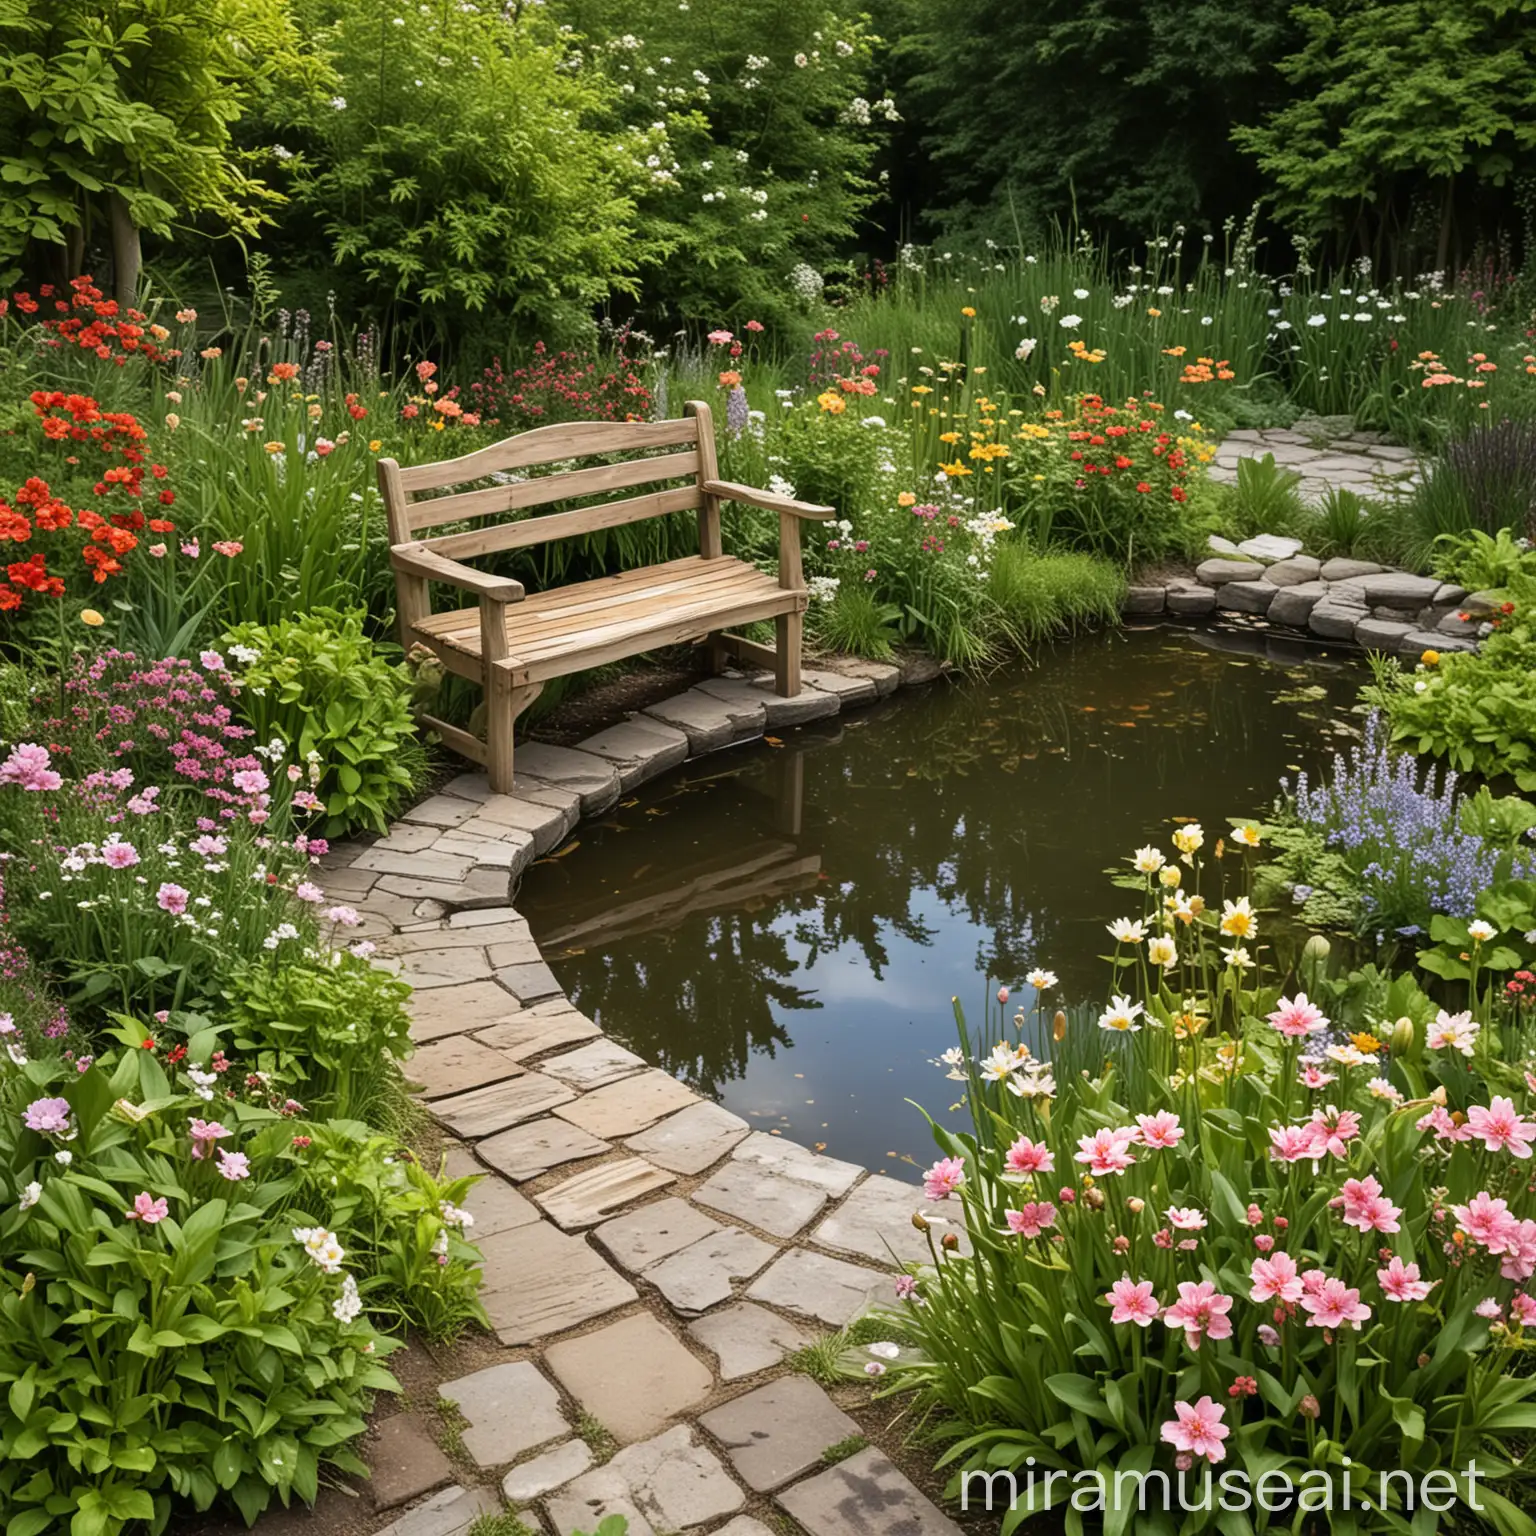 Create an image of a small, peaceful garden with a wooden bench, blooming flowers, and a small pond